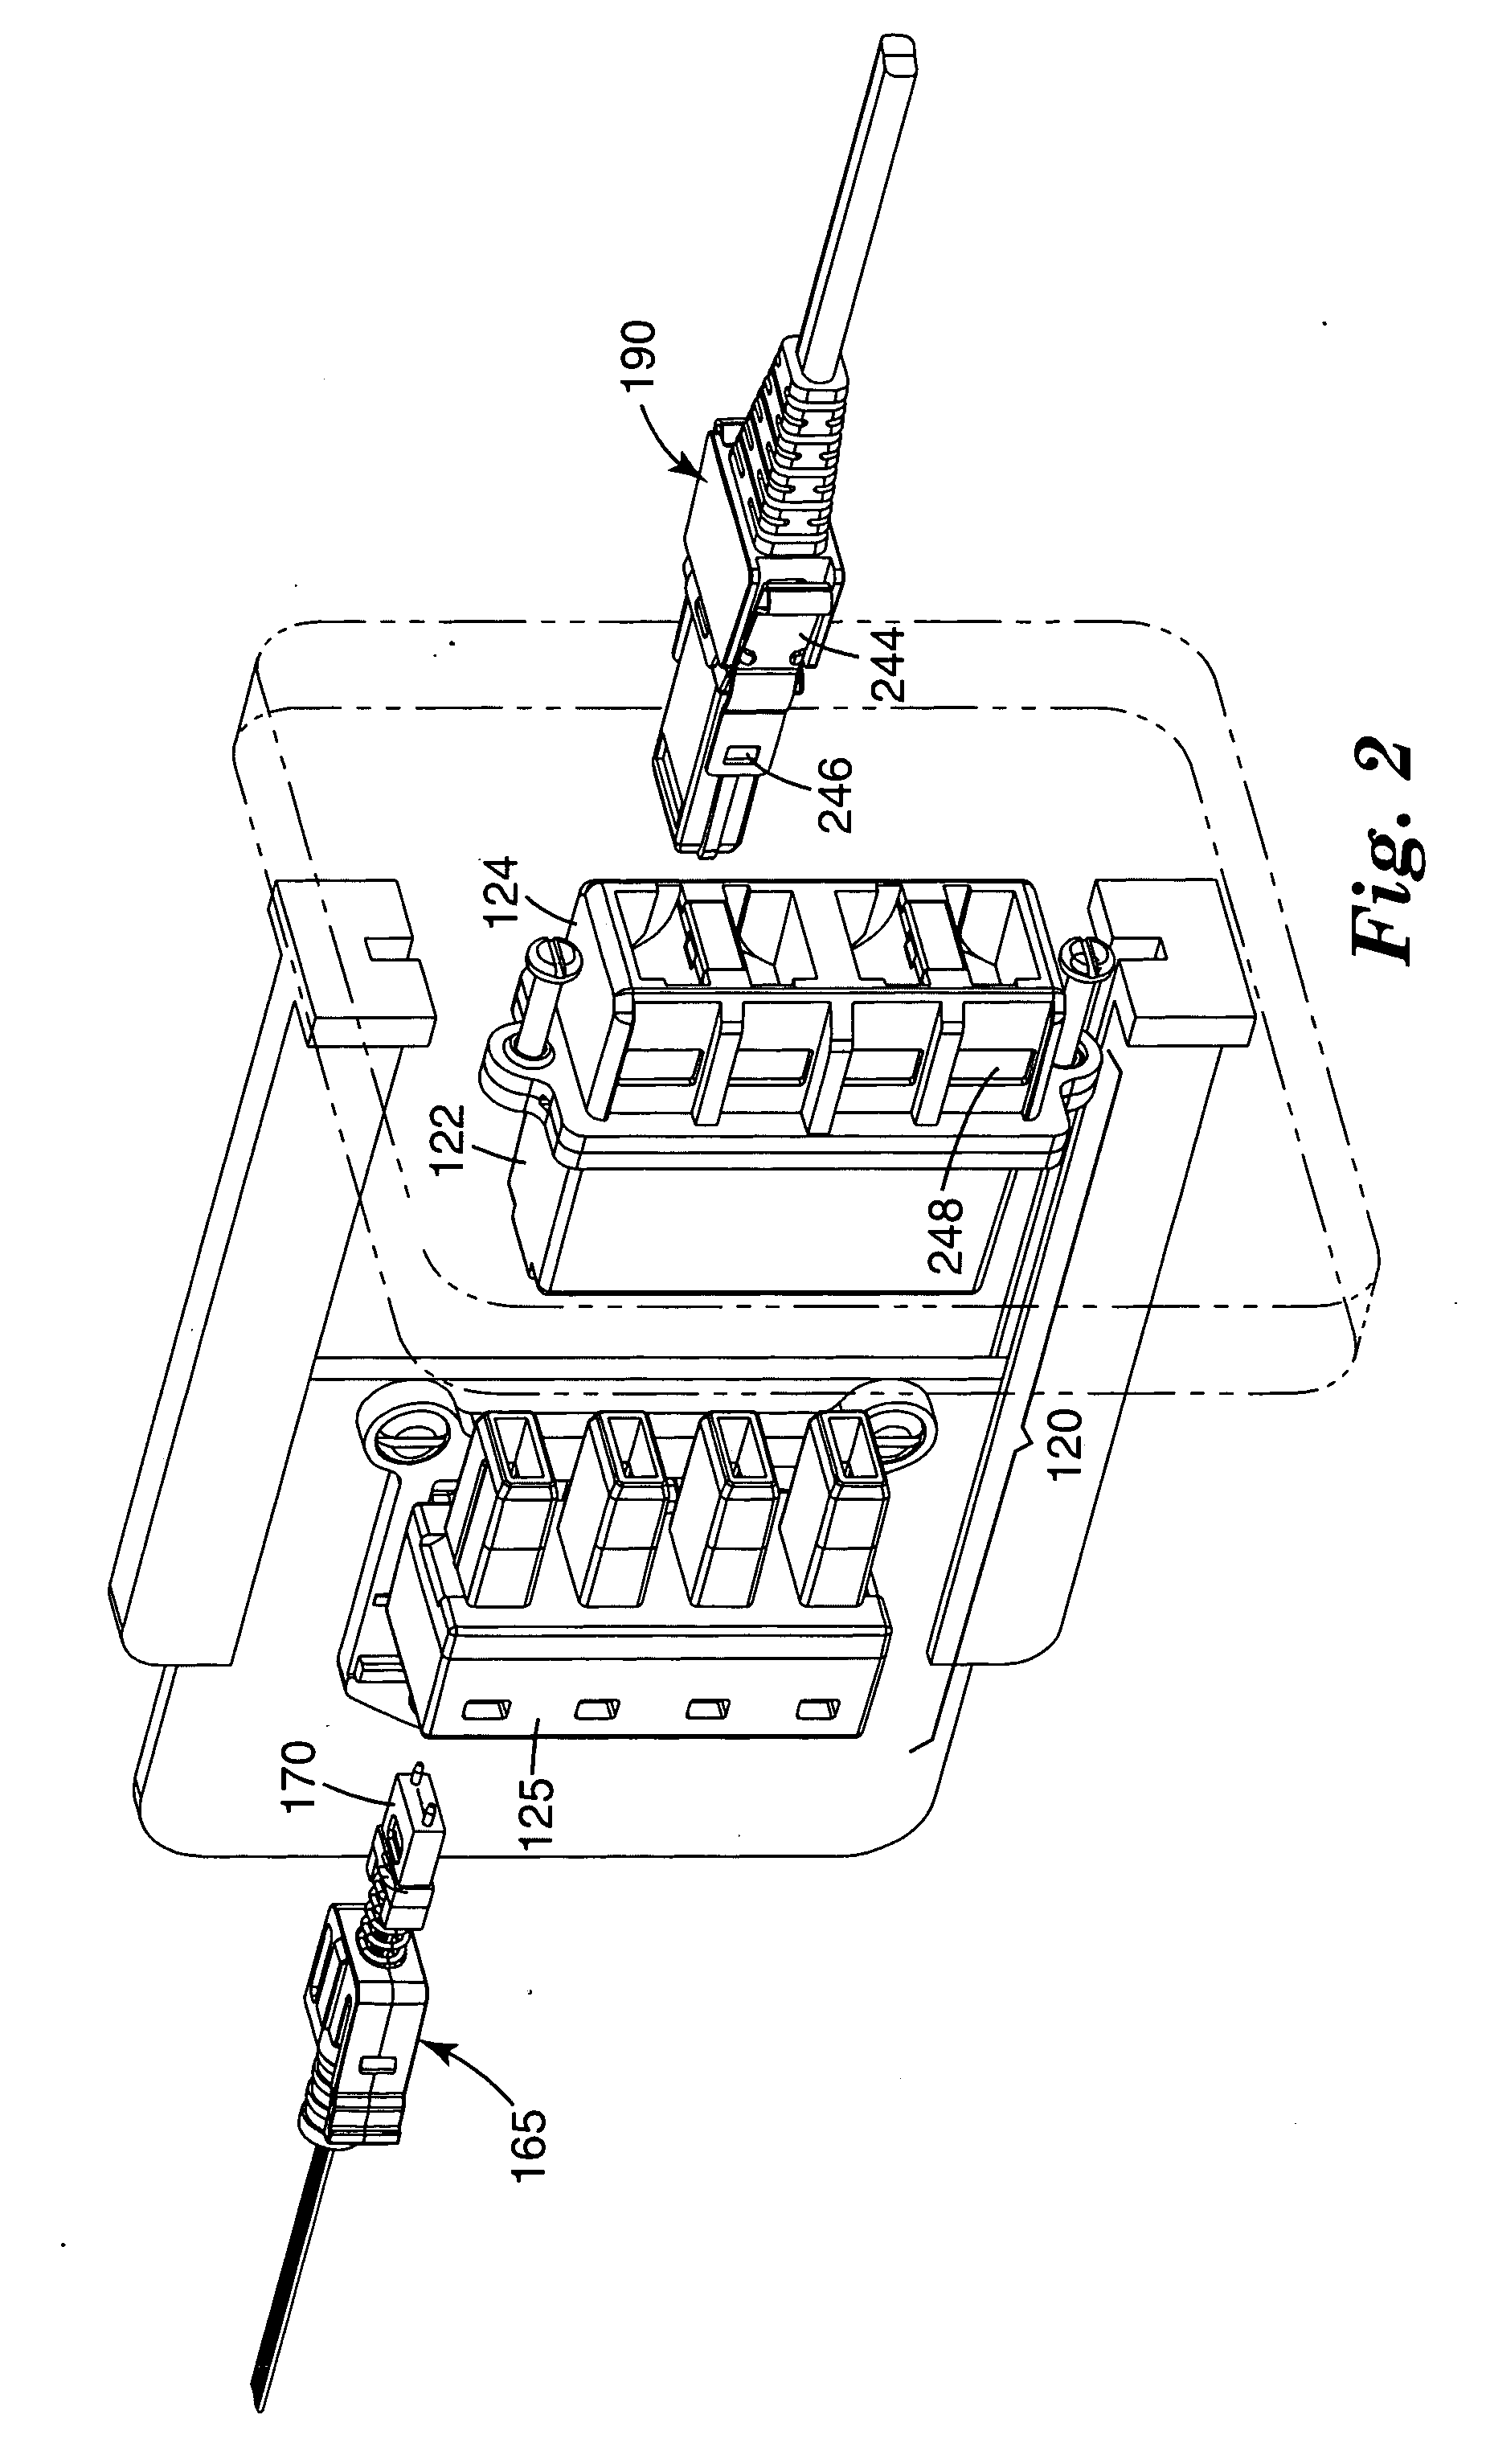 Optical connector system with EMI shielding